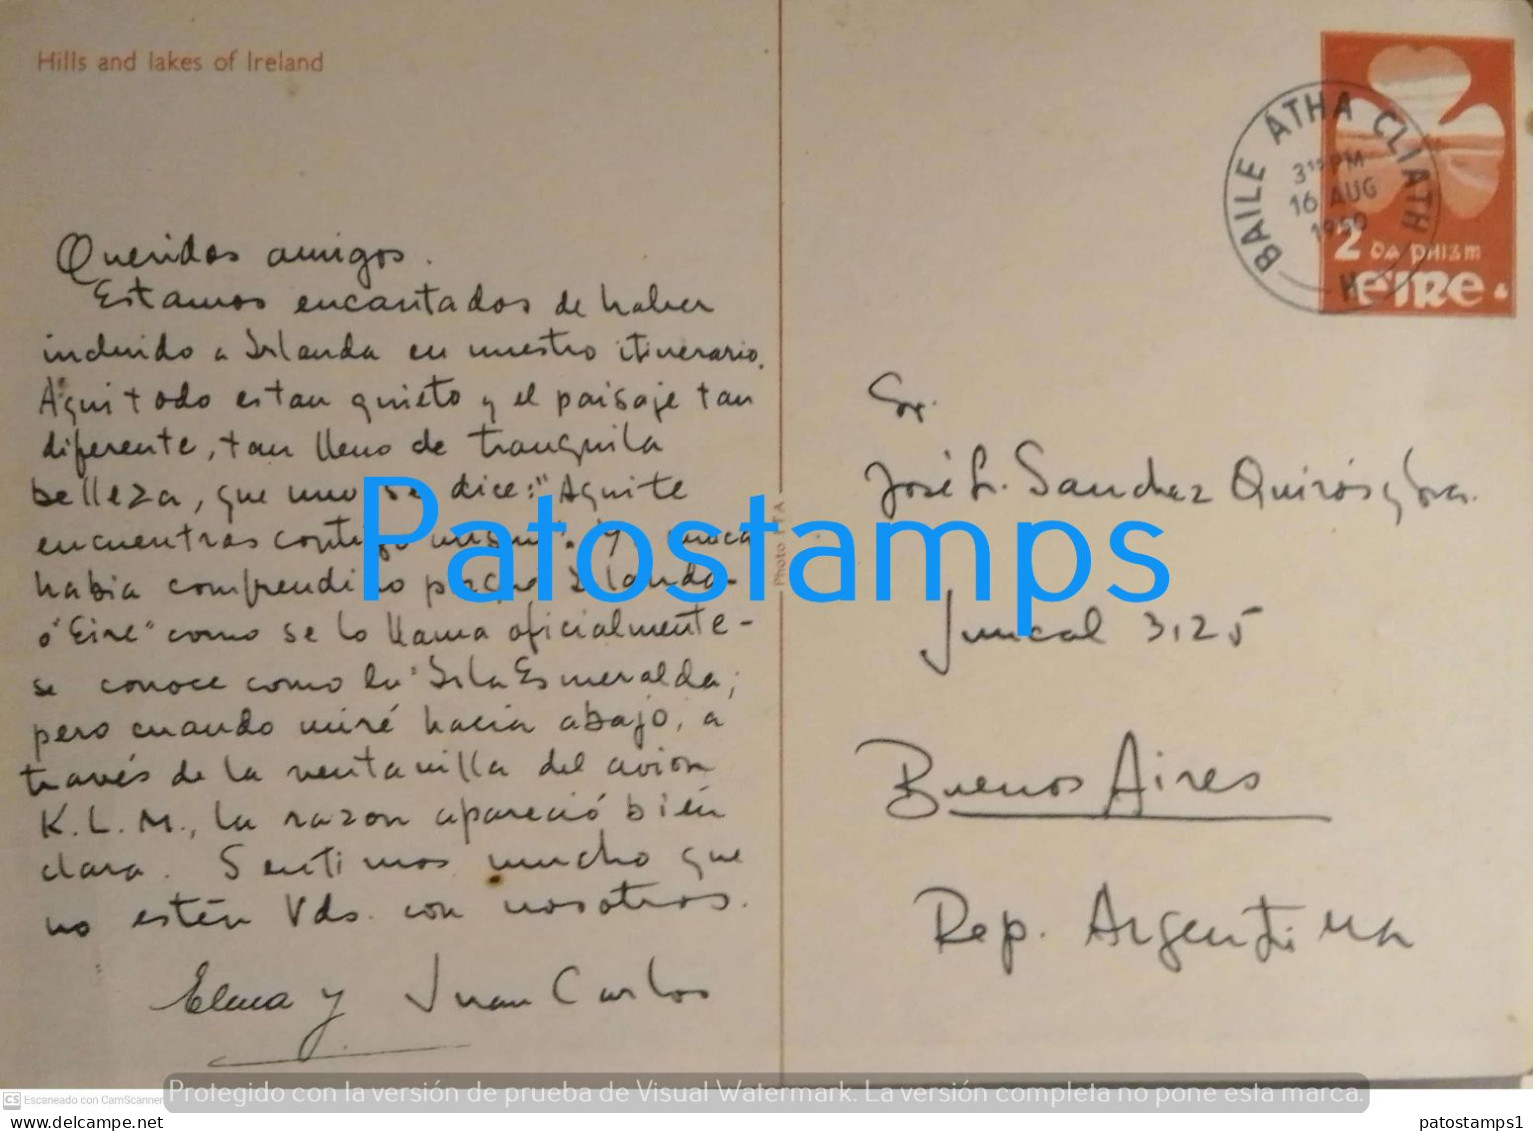 204102 IRELAND HILLS AND LAKES YEAR 1950 CIRCULATED TO ARGENTINA POSTAL SATIONERY POSTCARD - Ganzsachen